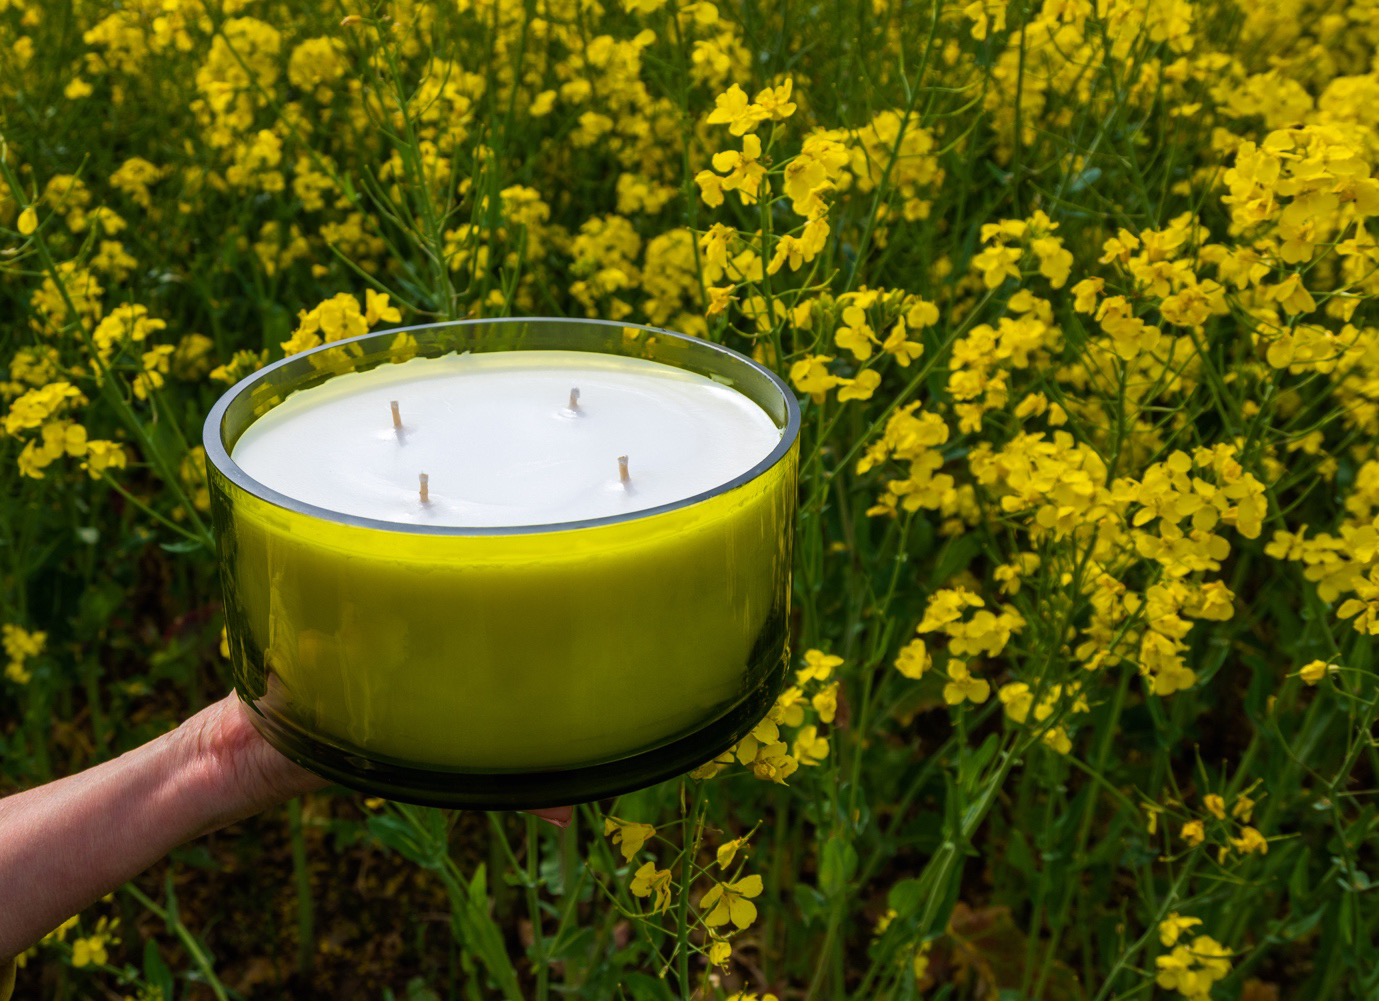 Large green candle bowl held up in a field of yellow flowers.